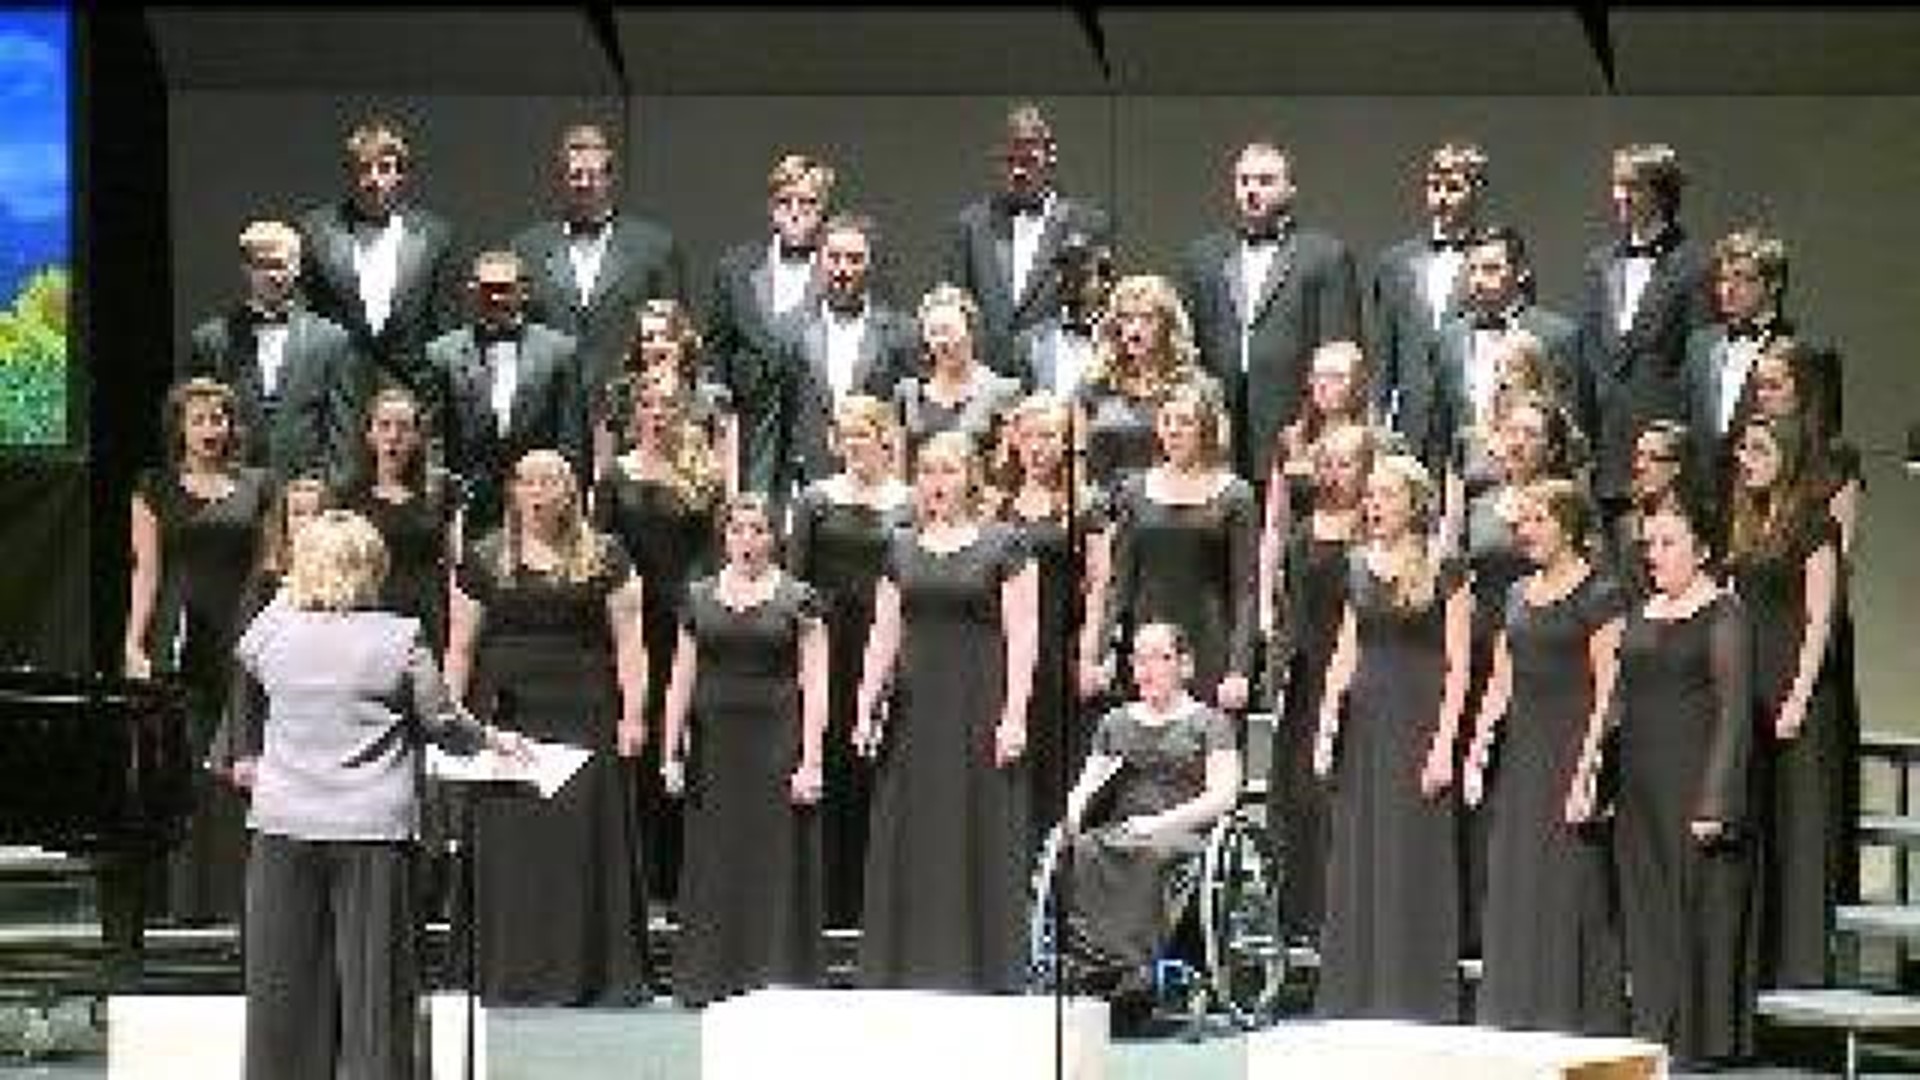 Concert focuses on sustainability